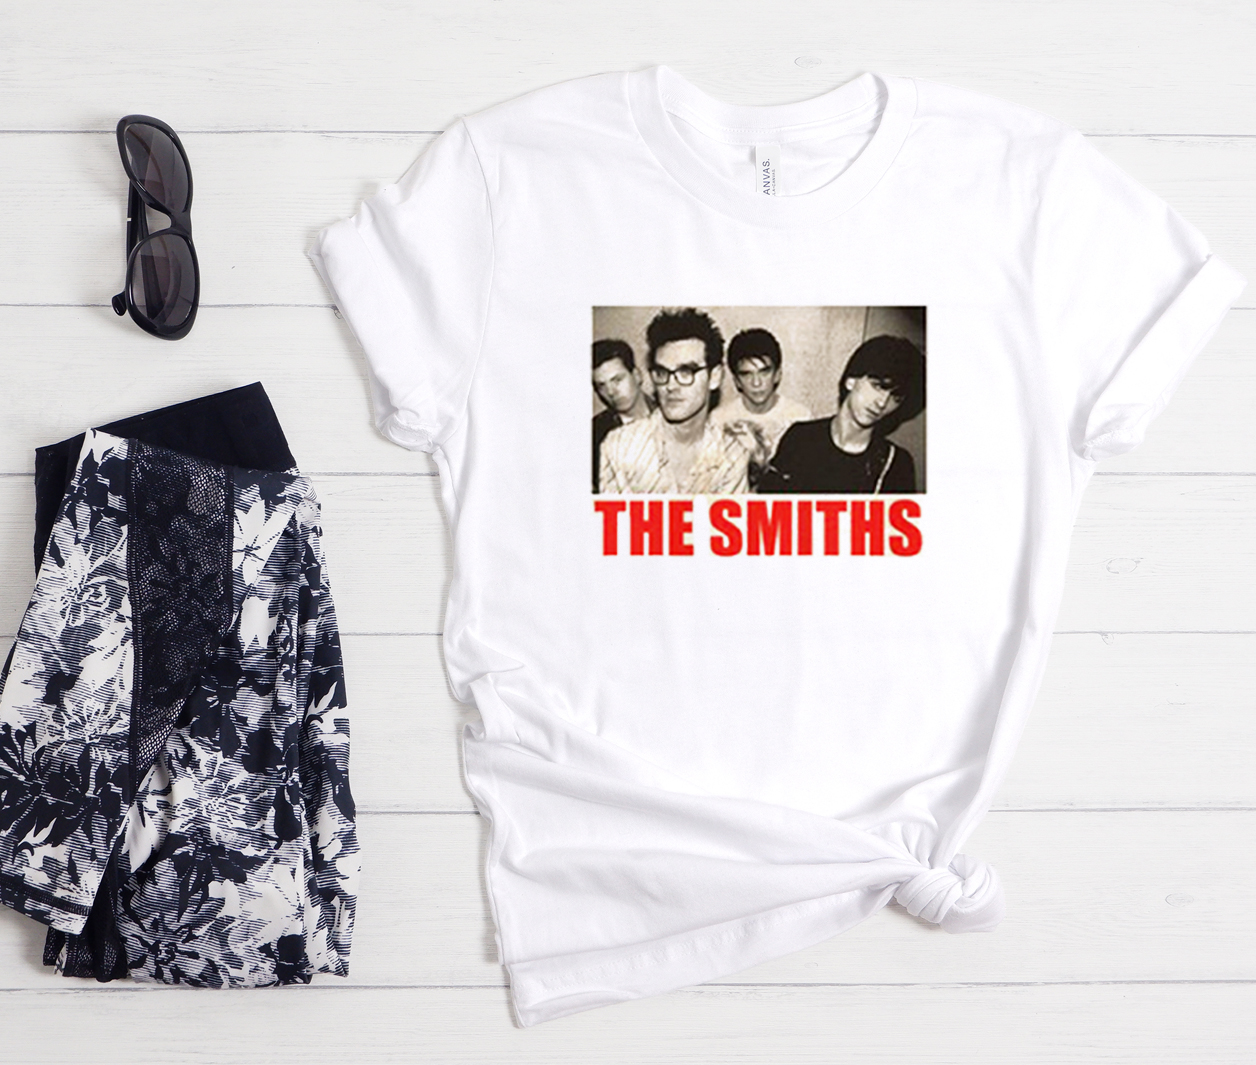 The Smiths Band T shirt